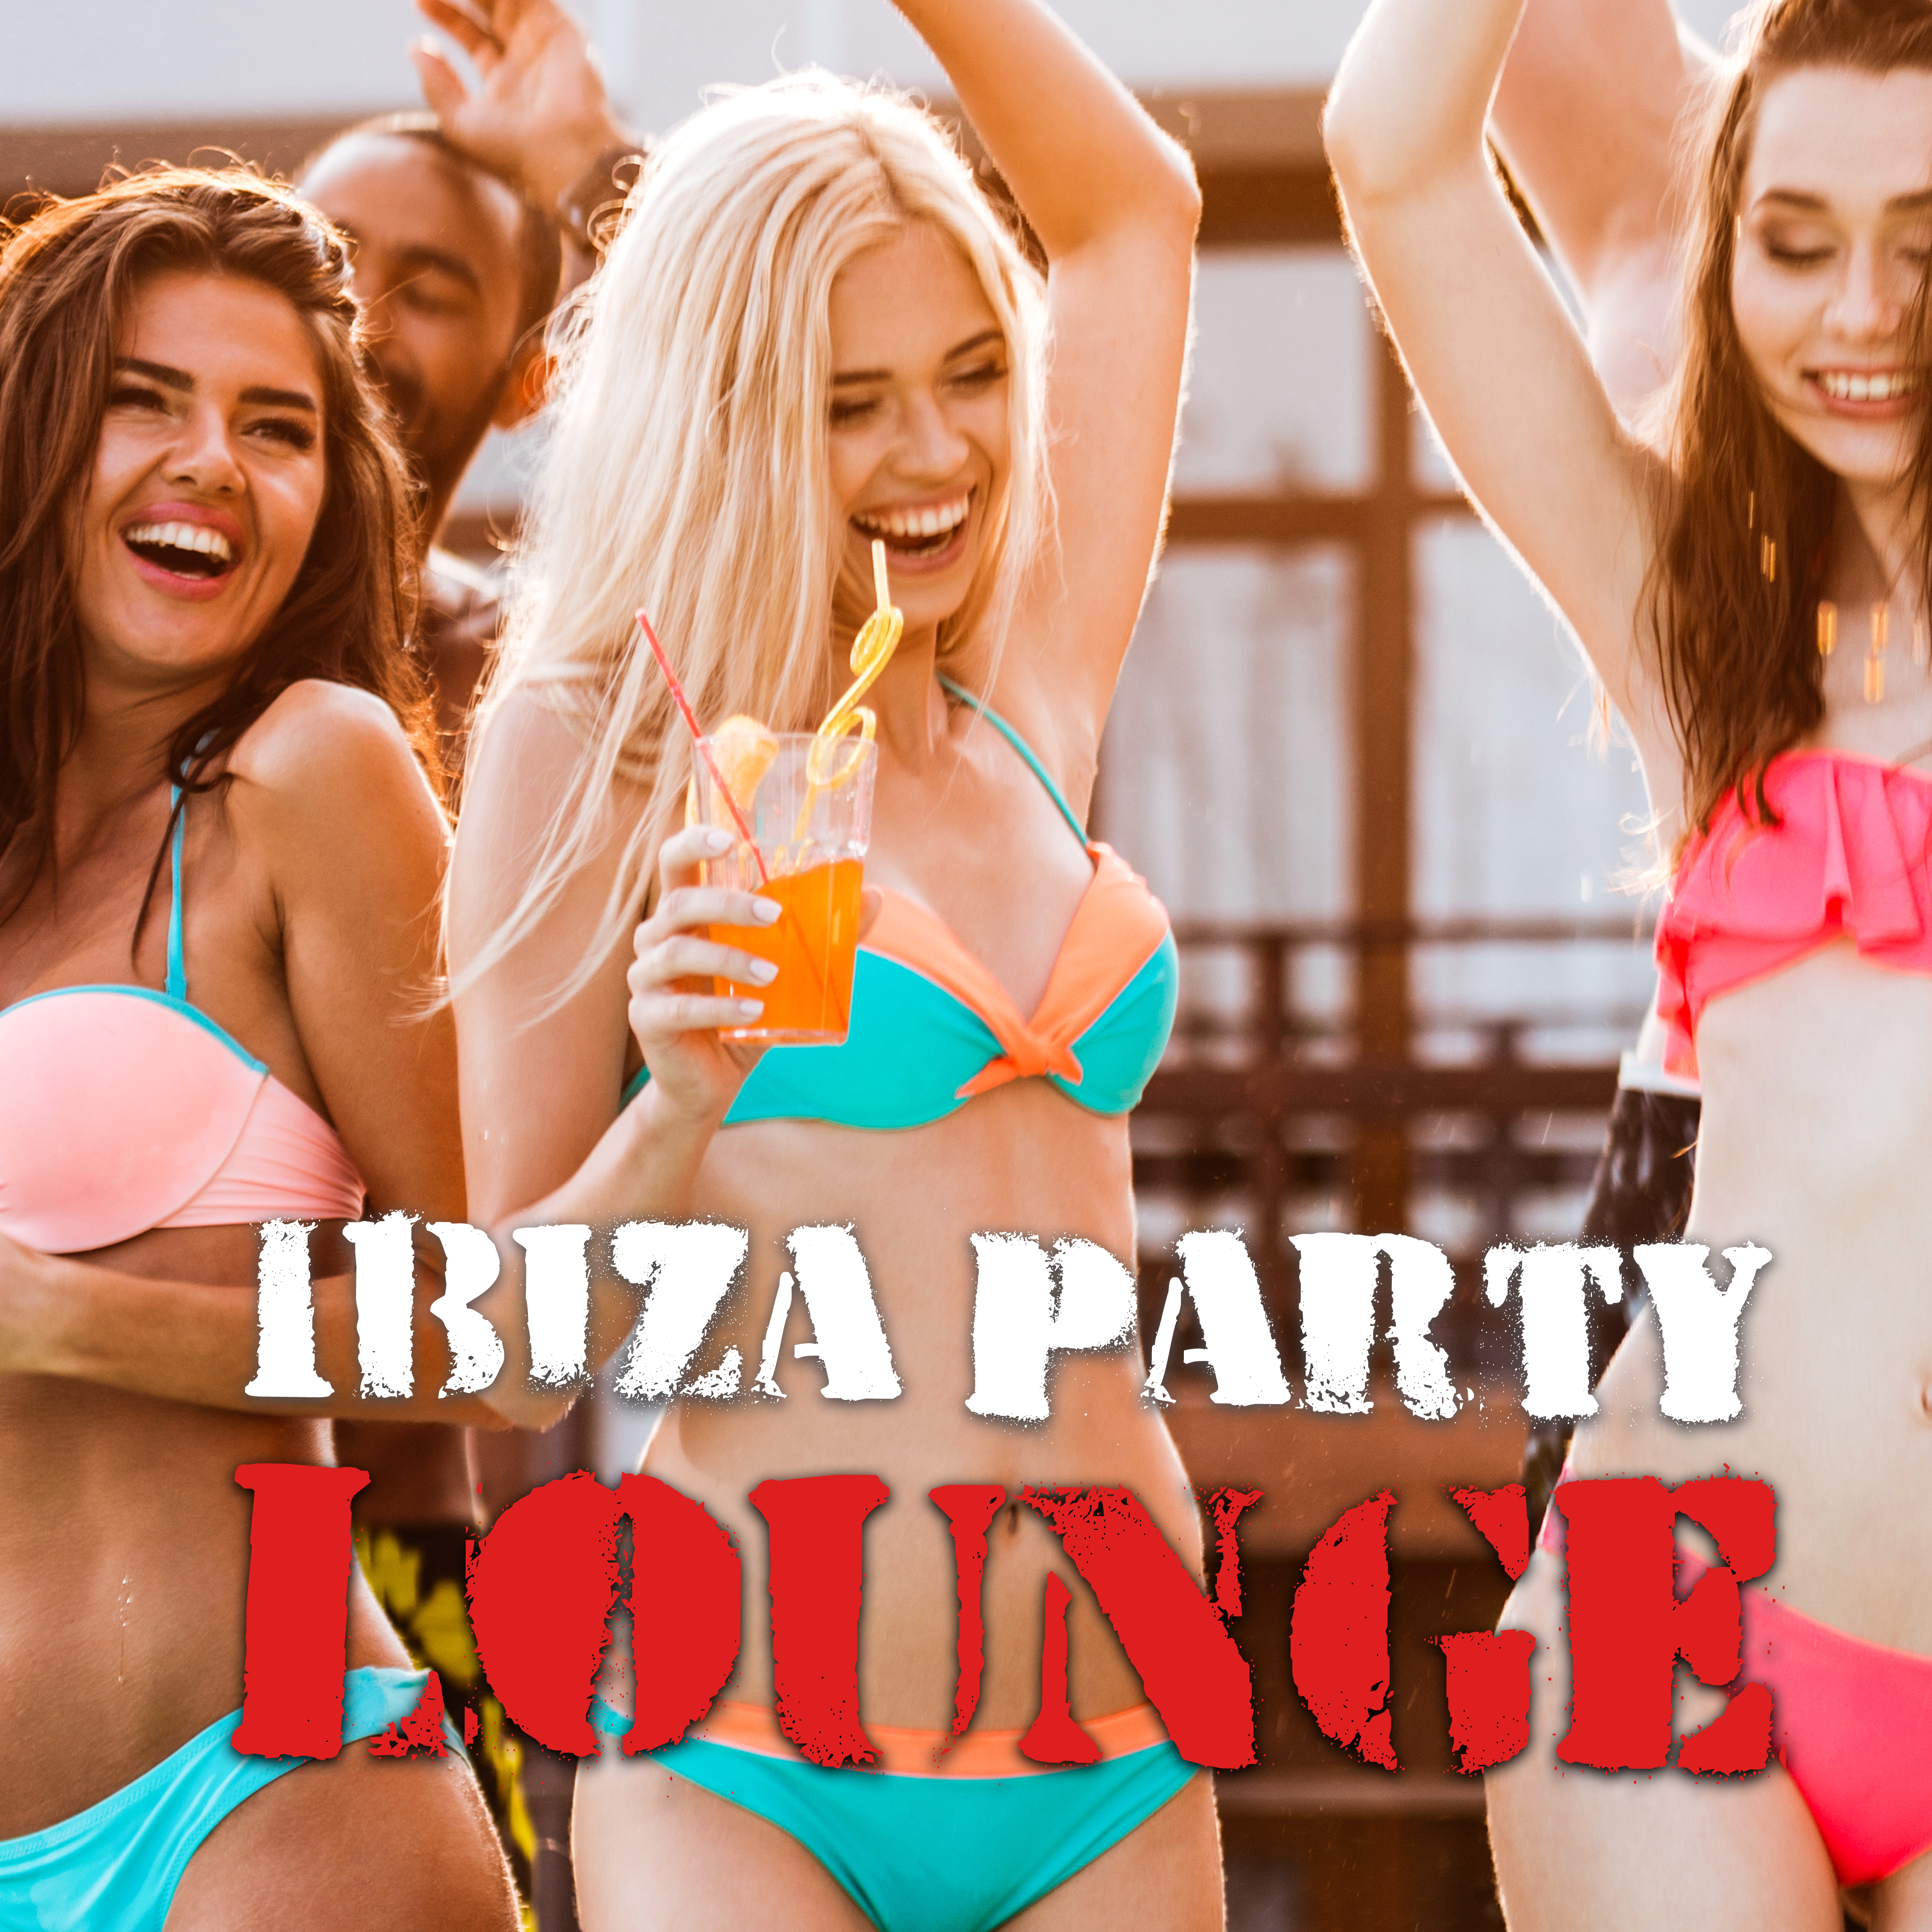 Ibiza Party Lounge  Chillout Music, Party Music, Dancefloor, Relax By the Pool, Drinkbar Music